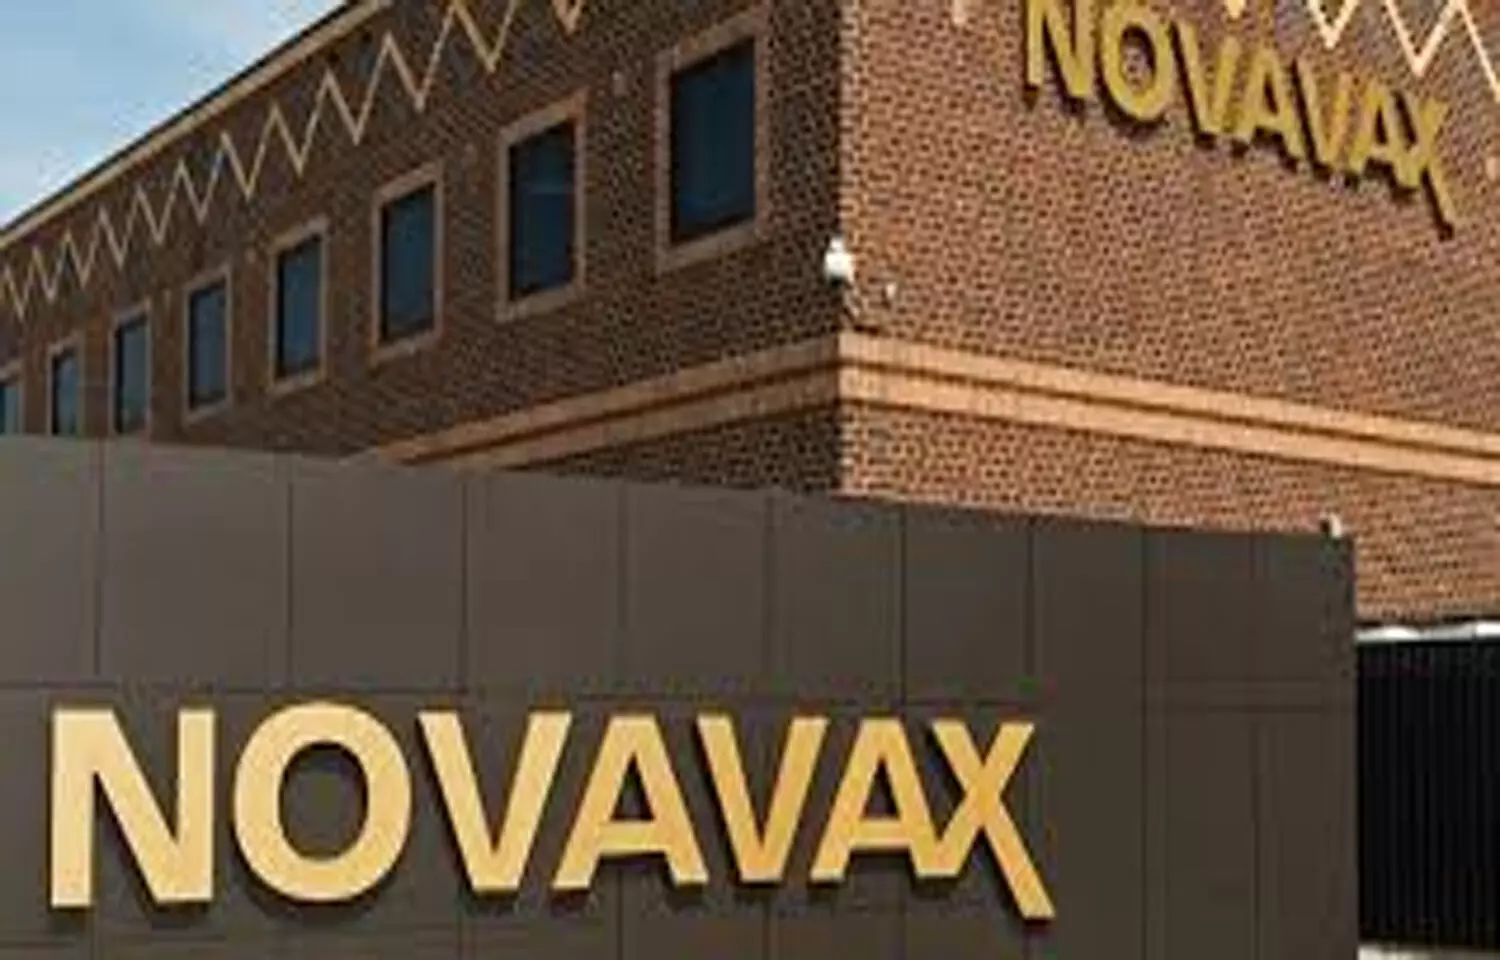 Novavax COVID vaccine gets USFDA emergency use nod for 18 years and older